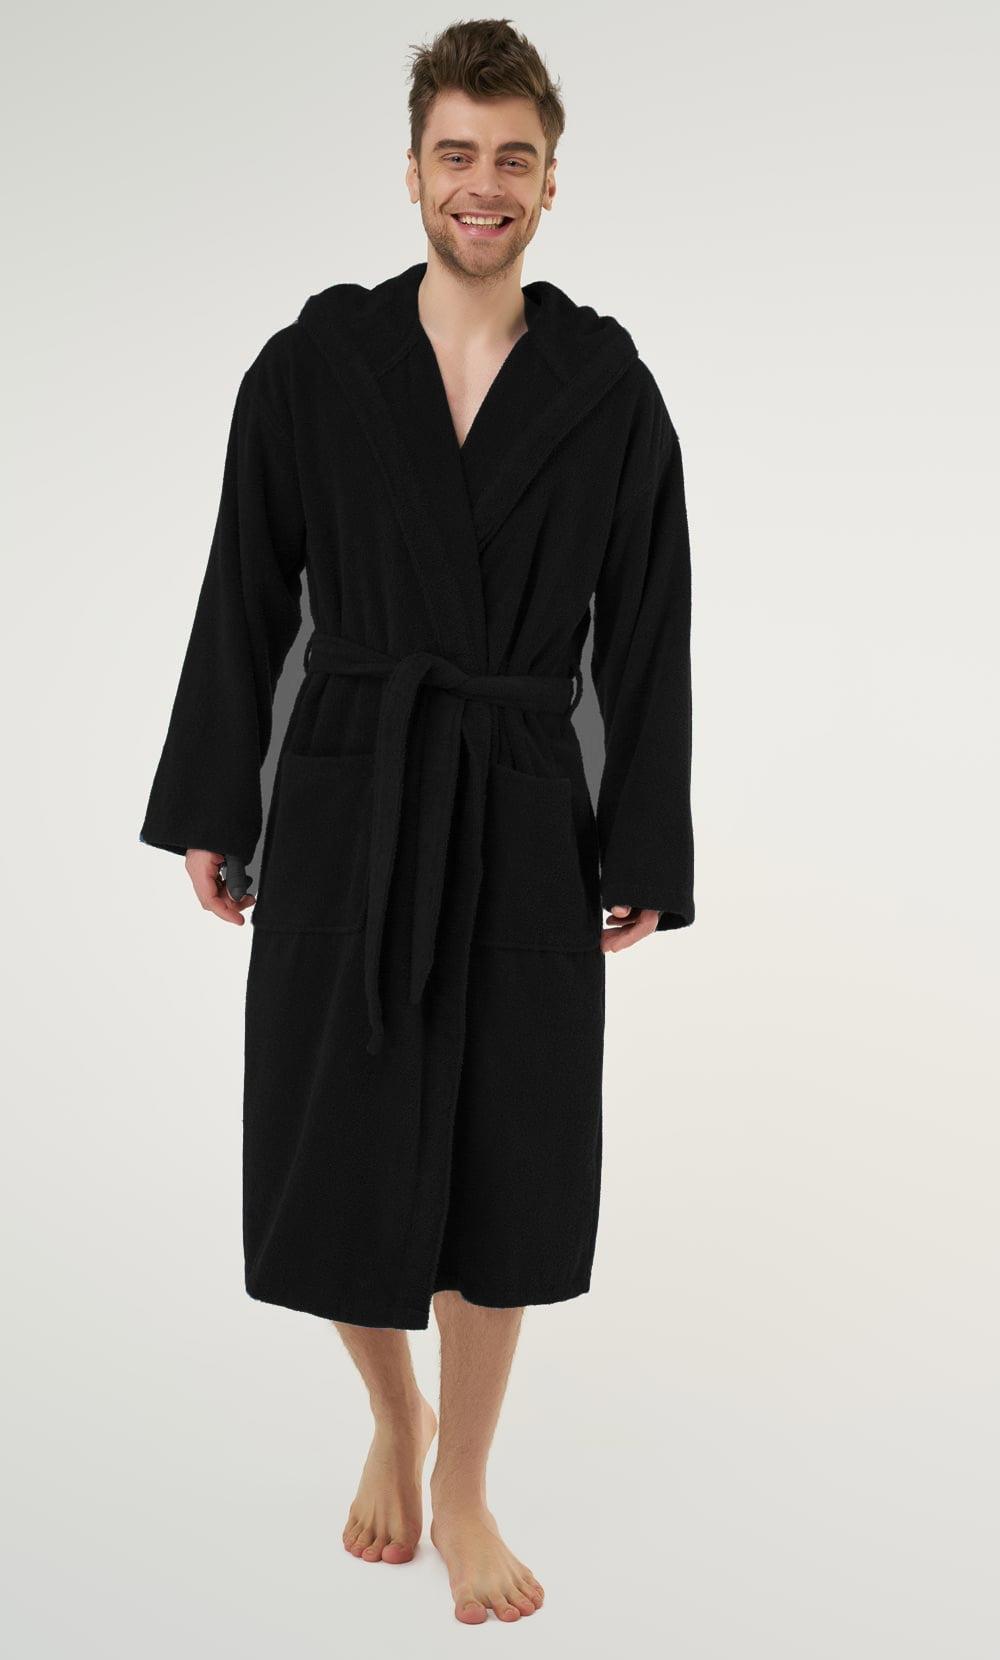 Unisex 100% Egyptian Soft Cotton Terry Toweling Hooded Bath Robes Dressing Gown